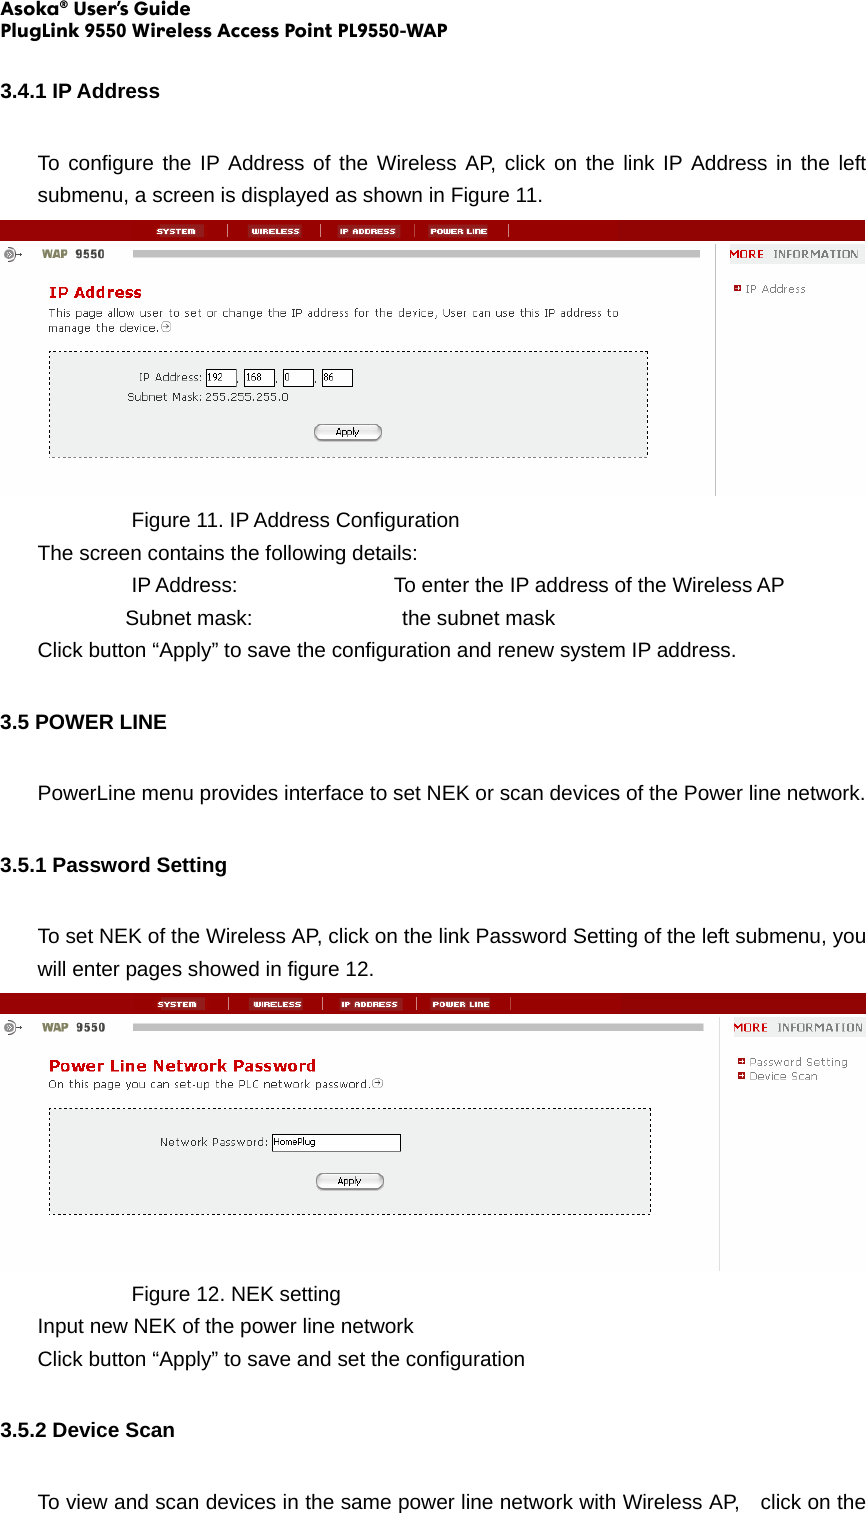 Asoka® User’s Guide PlugLink 9550 Wireless Access Point PL9550-WAP  3.4.1 IP Address To configure the IP Address of the Wireless AP, click on the link IP Address in the left submenu, a screen is displayed as shown in Figure 11.     Figure 11. IP Address Configuration The screen contains the following details: IP Address:        To enter the IP address of the Wireless AP Subnet mask:          the subnet mask Click button “Apply” to save the configuration and renew system IP address. 3.5 POWER LINE   PowerLine menu provides interface to set NEK or scan devices of the Power line network. 3.5.1 Password Setting To set NEK of the Wireless AP, click on the link Password Setting of the left submenu, you will enter pages showed in figure 12.     Figure 12. NEK setting  Input new NEK of the power line network Click button “Apply” to save and set the configuration 3.5.2 Device Scan To view and scan devices in the same power line network with Wireless AP,    click on the 